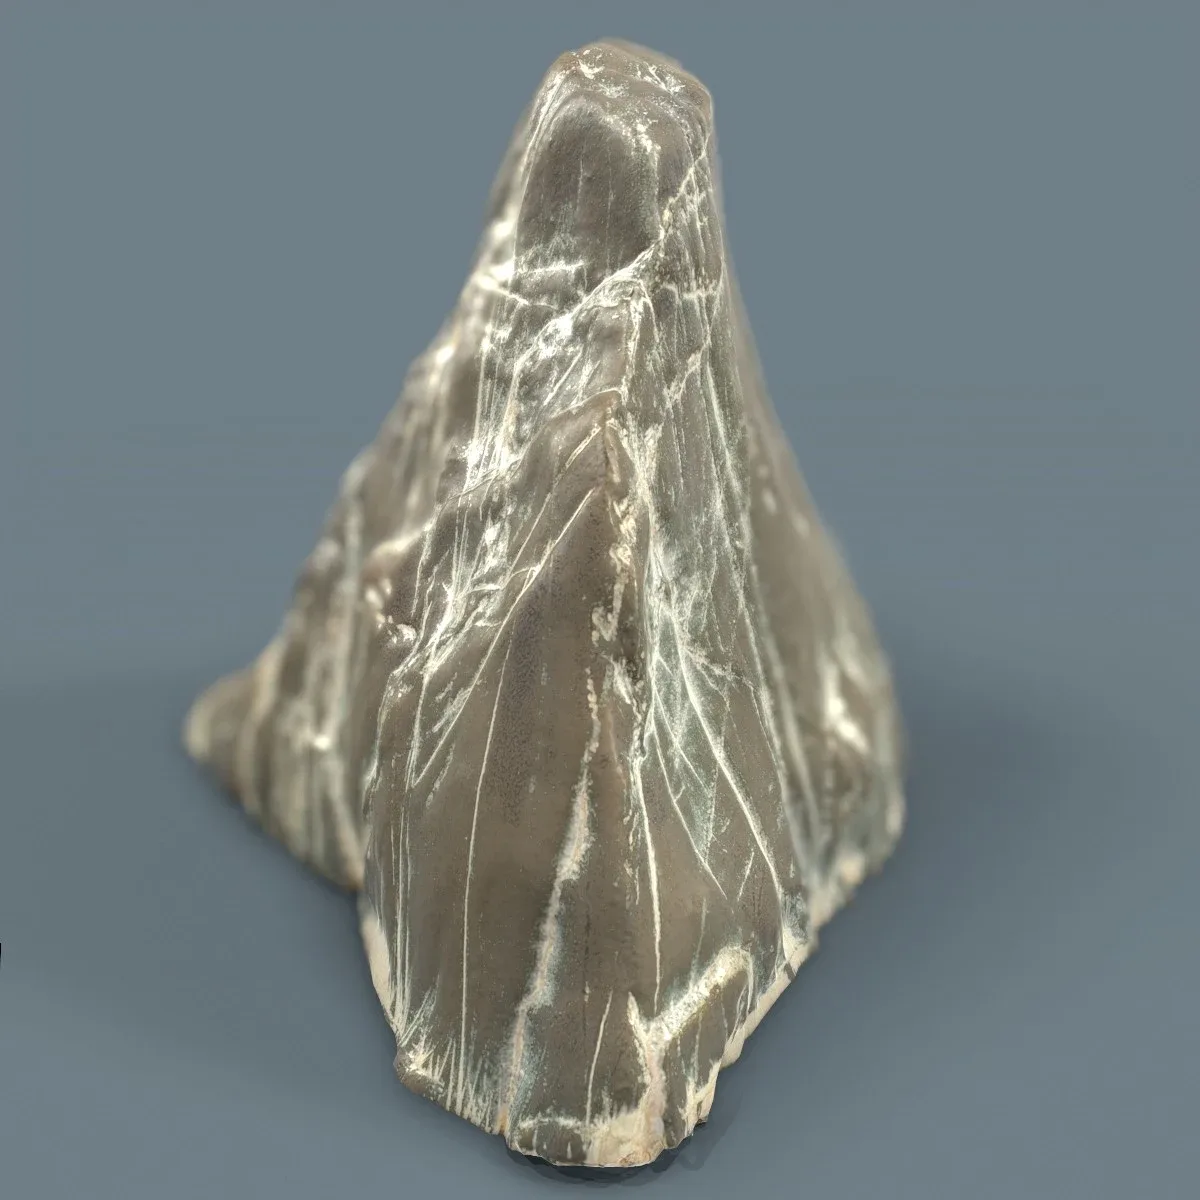 Suiseki Stone from Japan - High-Quality 3D Model with Metallic-Roughness PBR Textures for Games, VR, and Art Projects